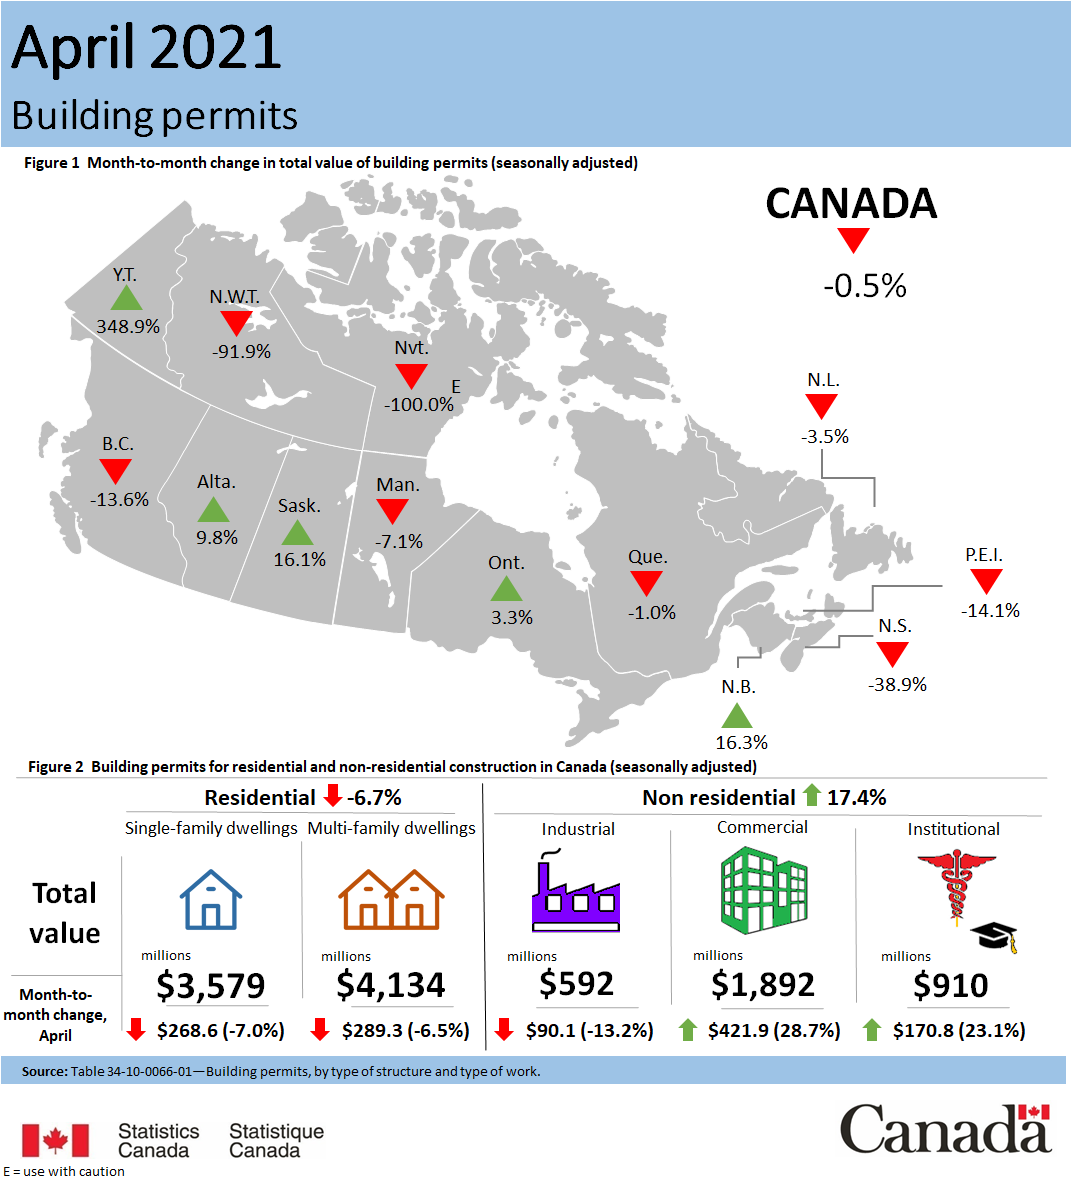 Thumbnail for Infographic 1: Building permits, April 2021